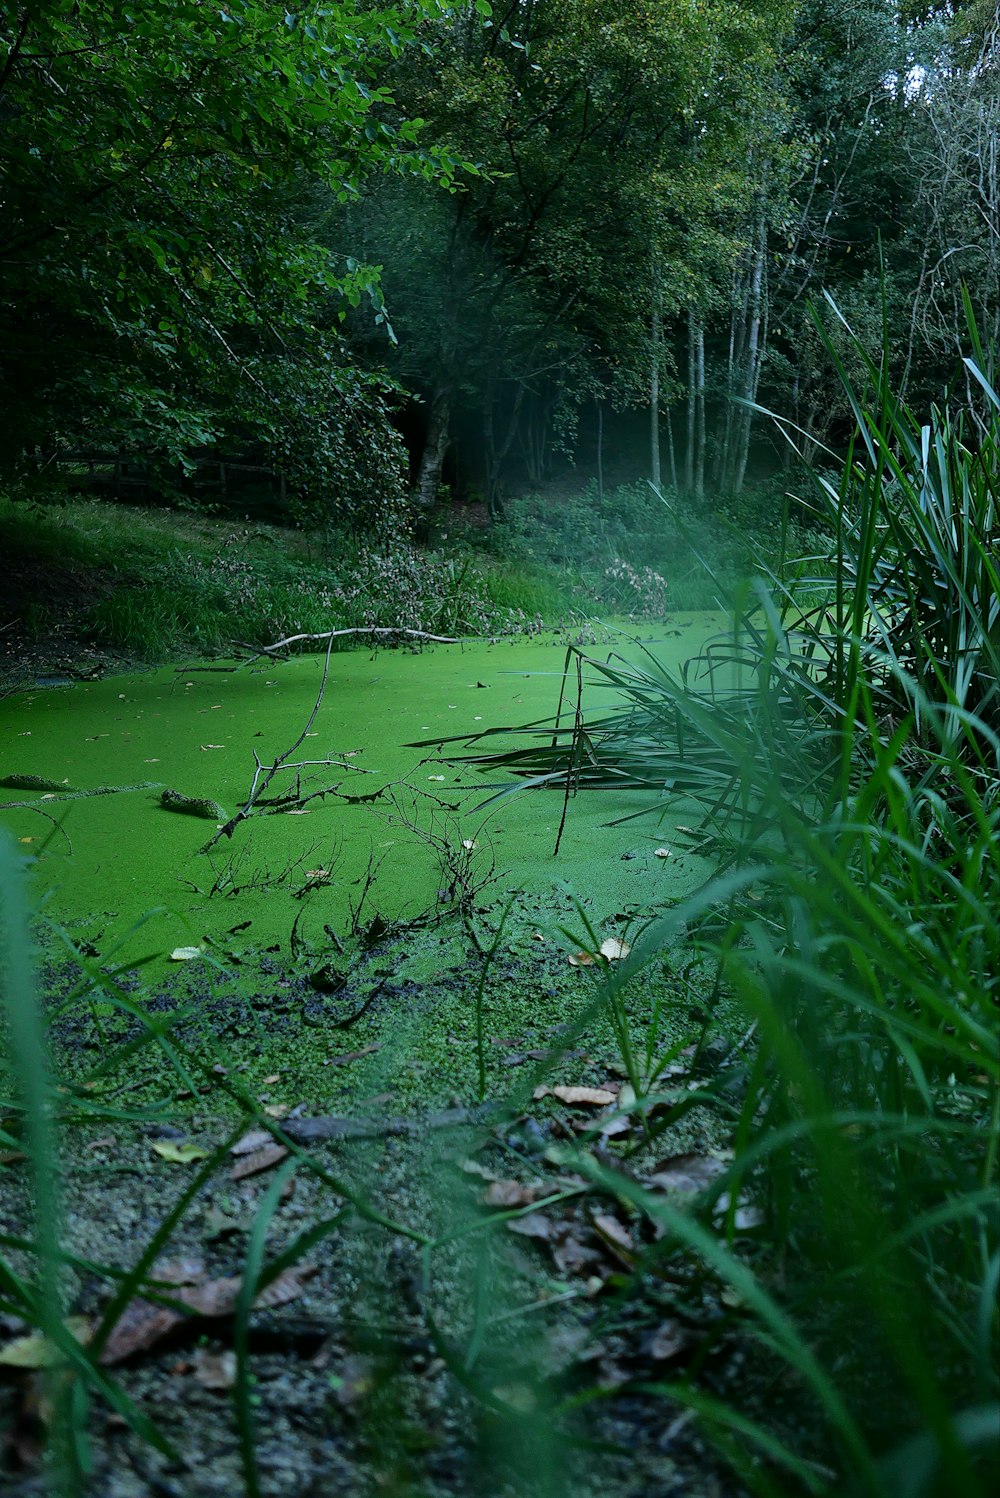 a body of water with green algae in it